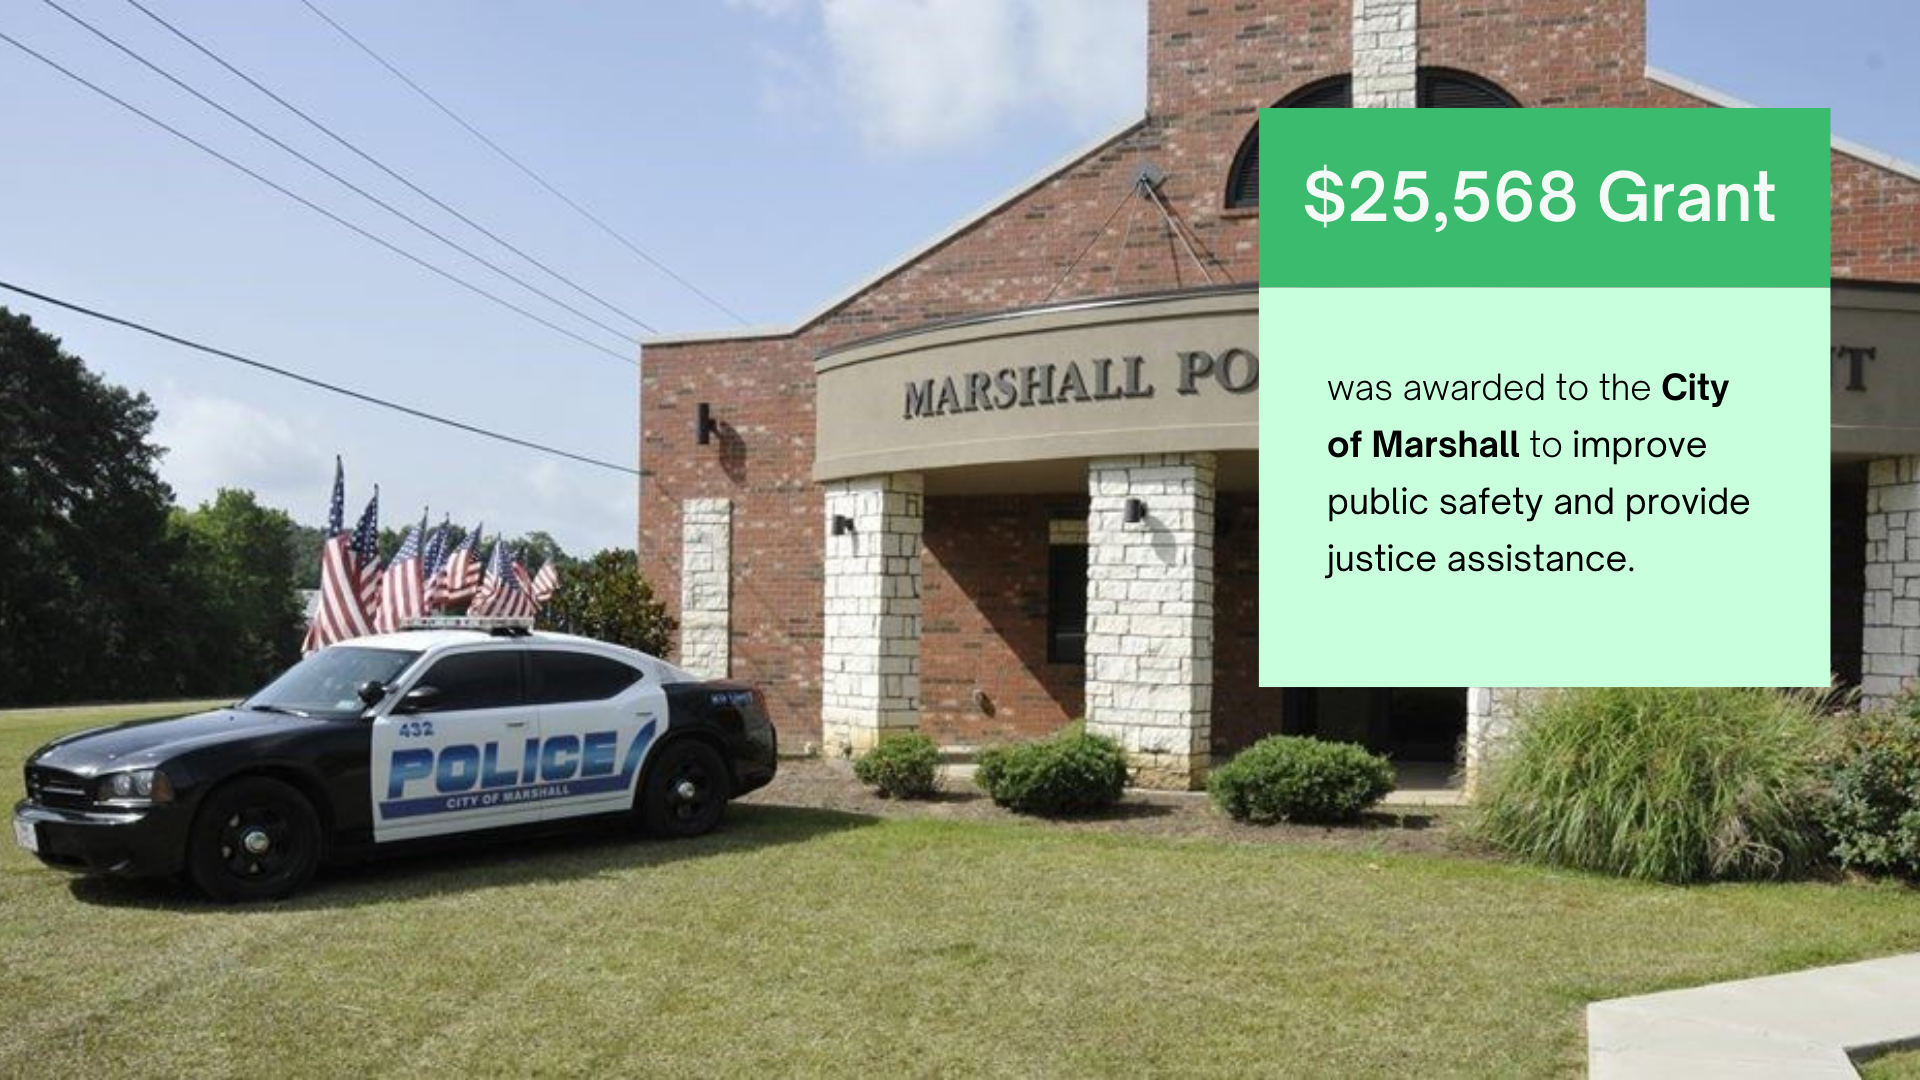 A police car is parked in front of a marshall police station